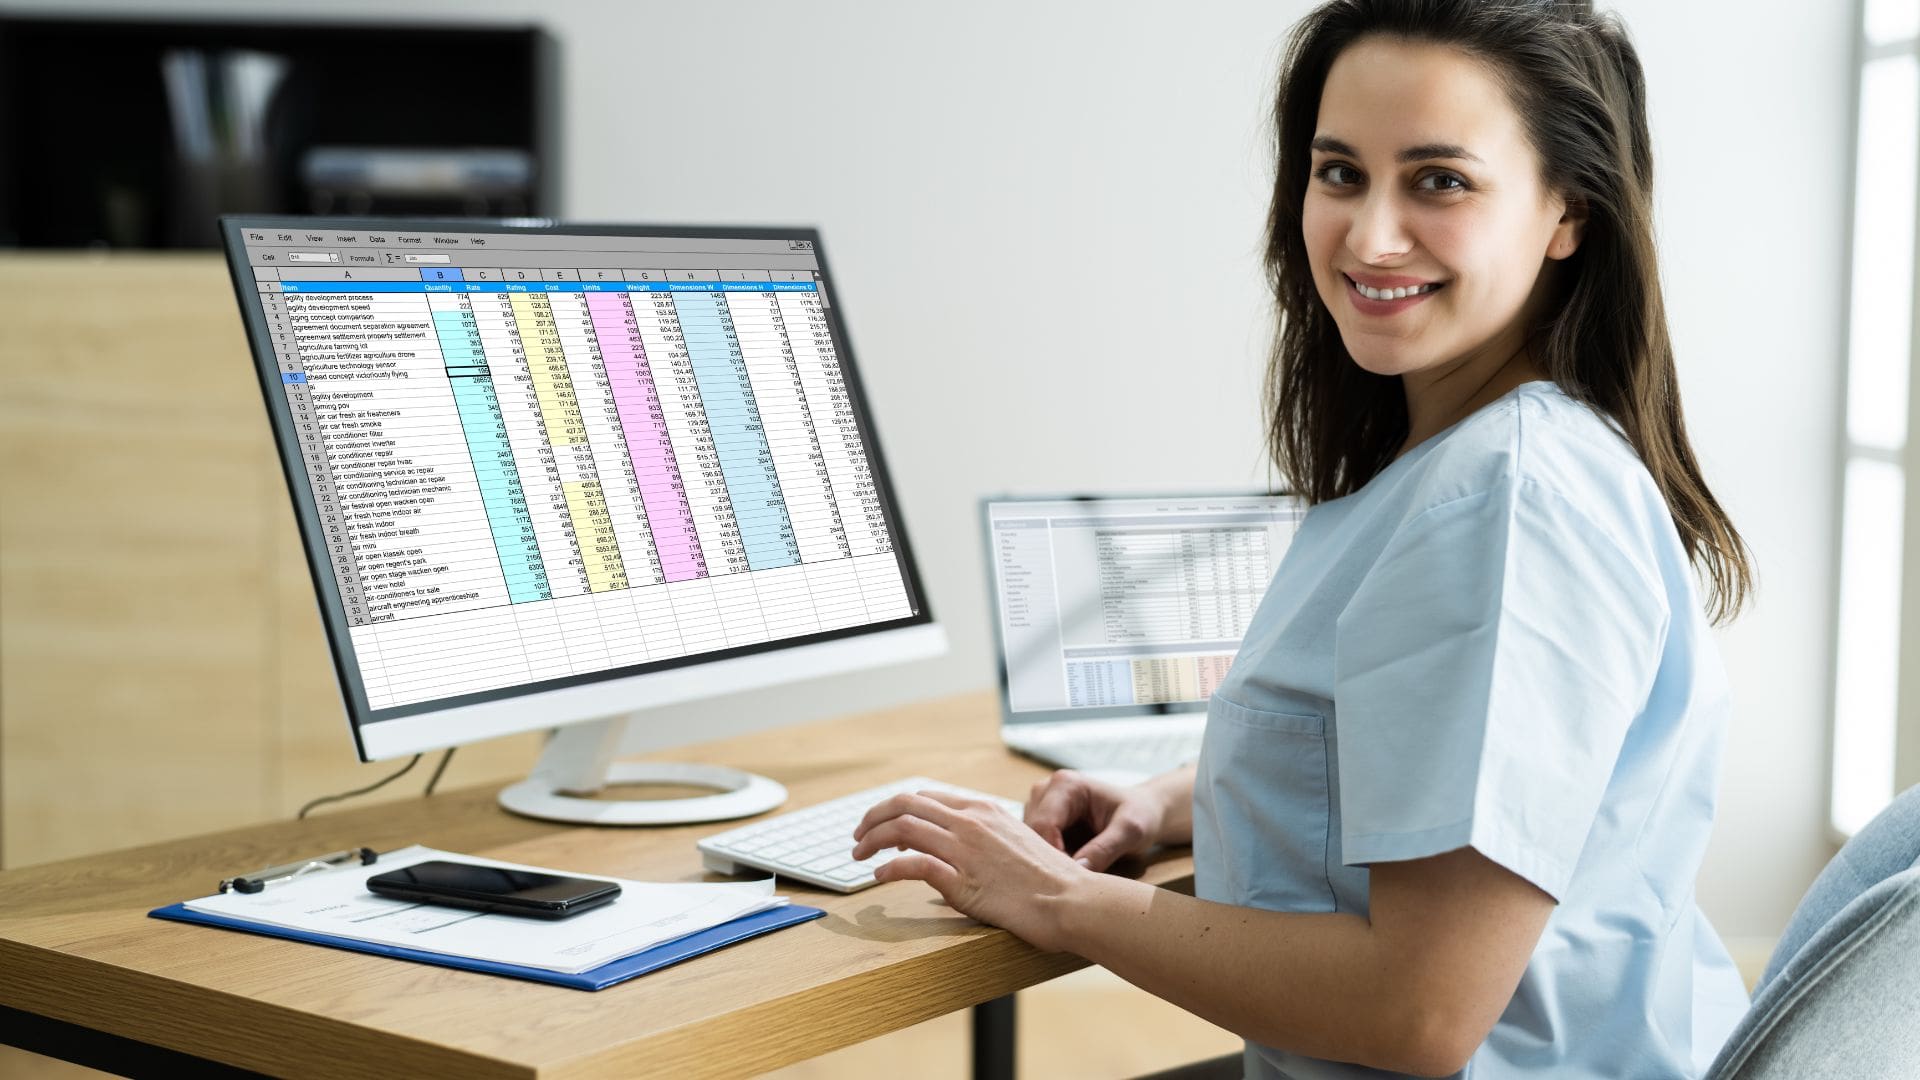 The Benefits of Having an IT Service Provider for Your Medical Billing Company